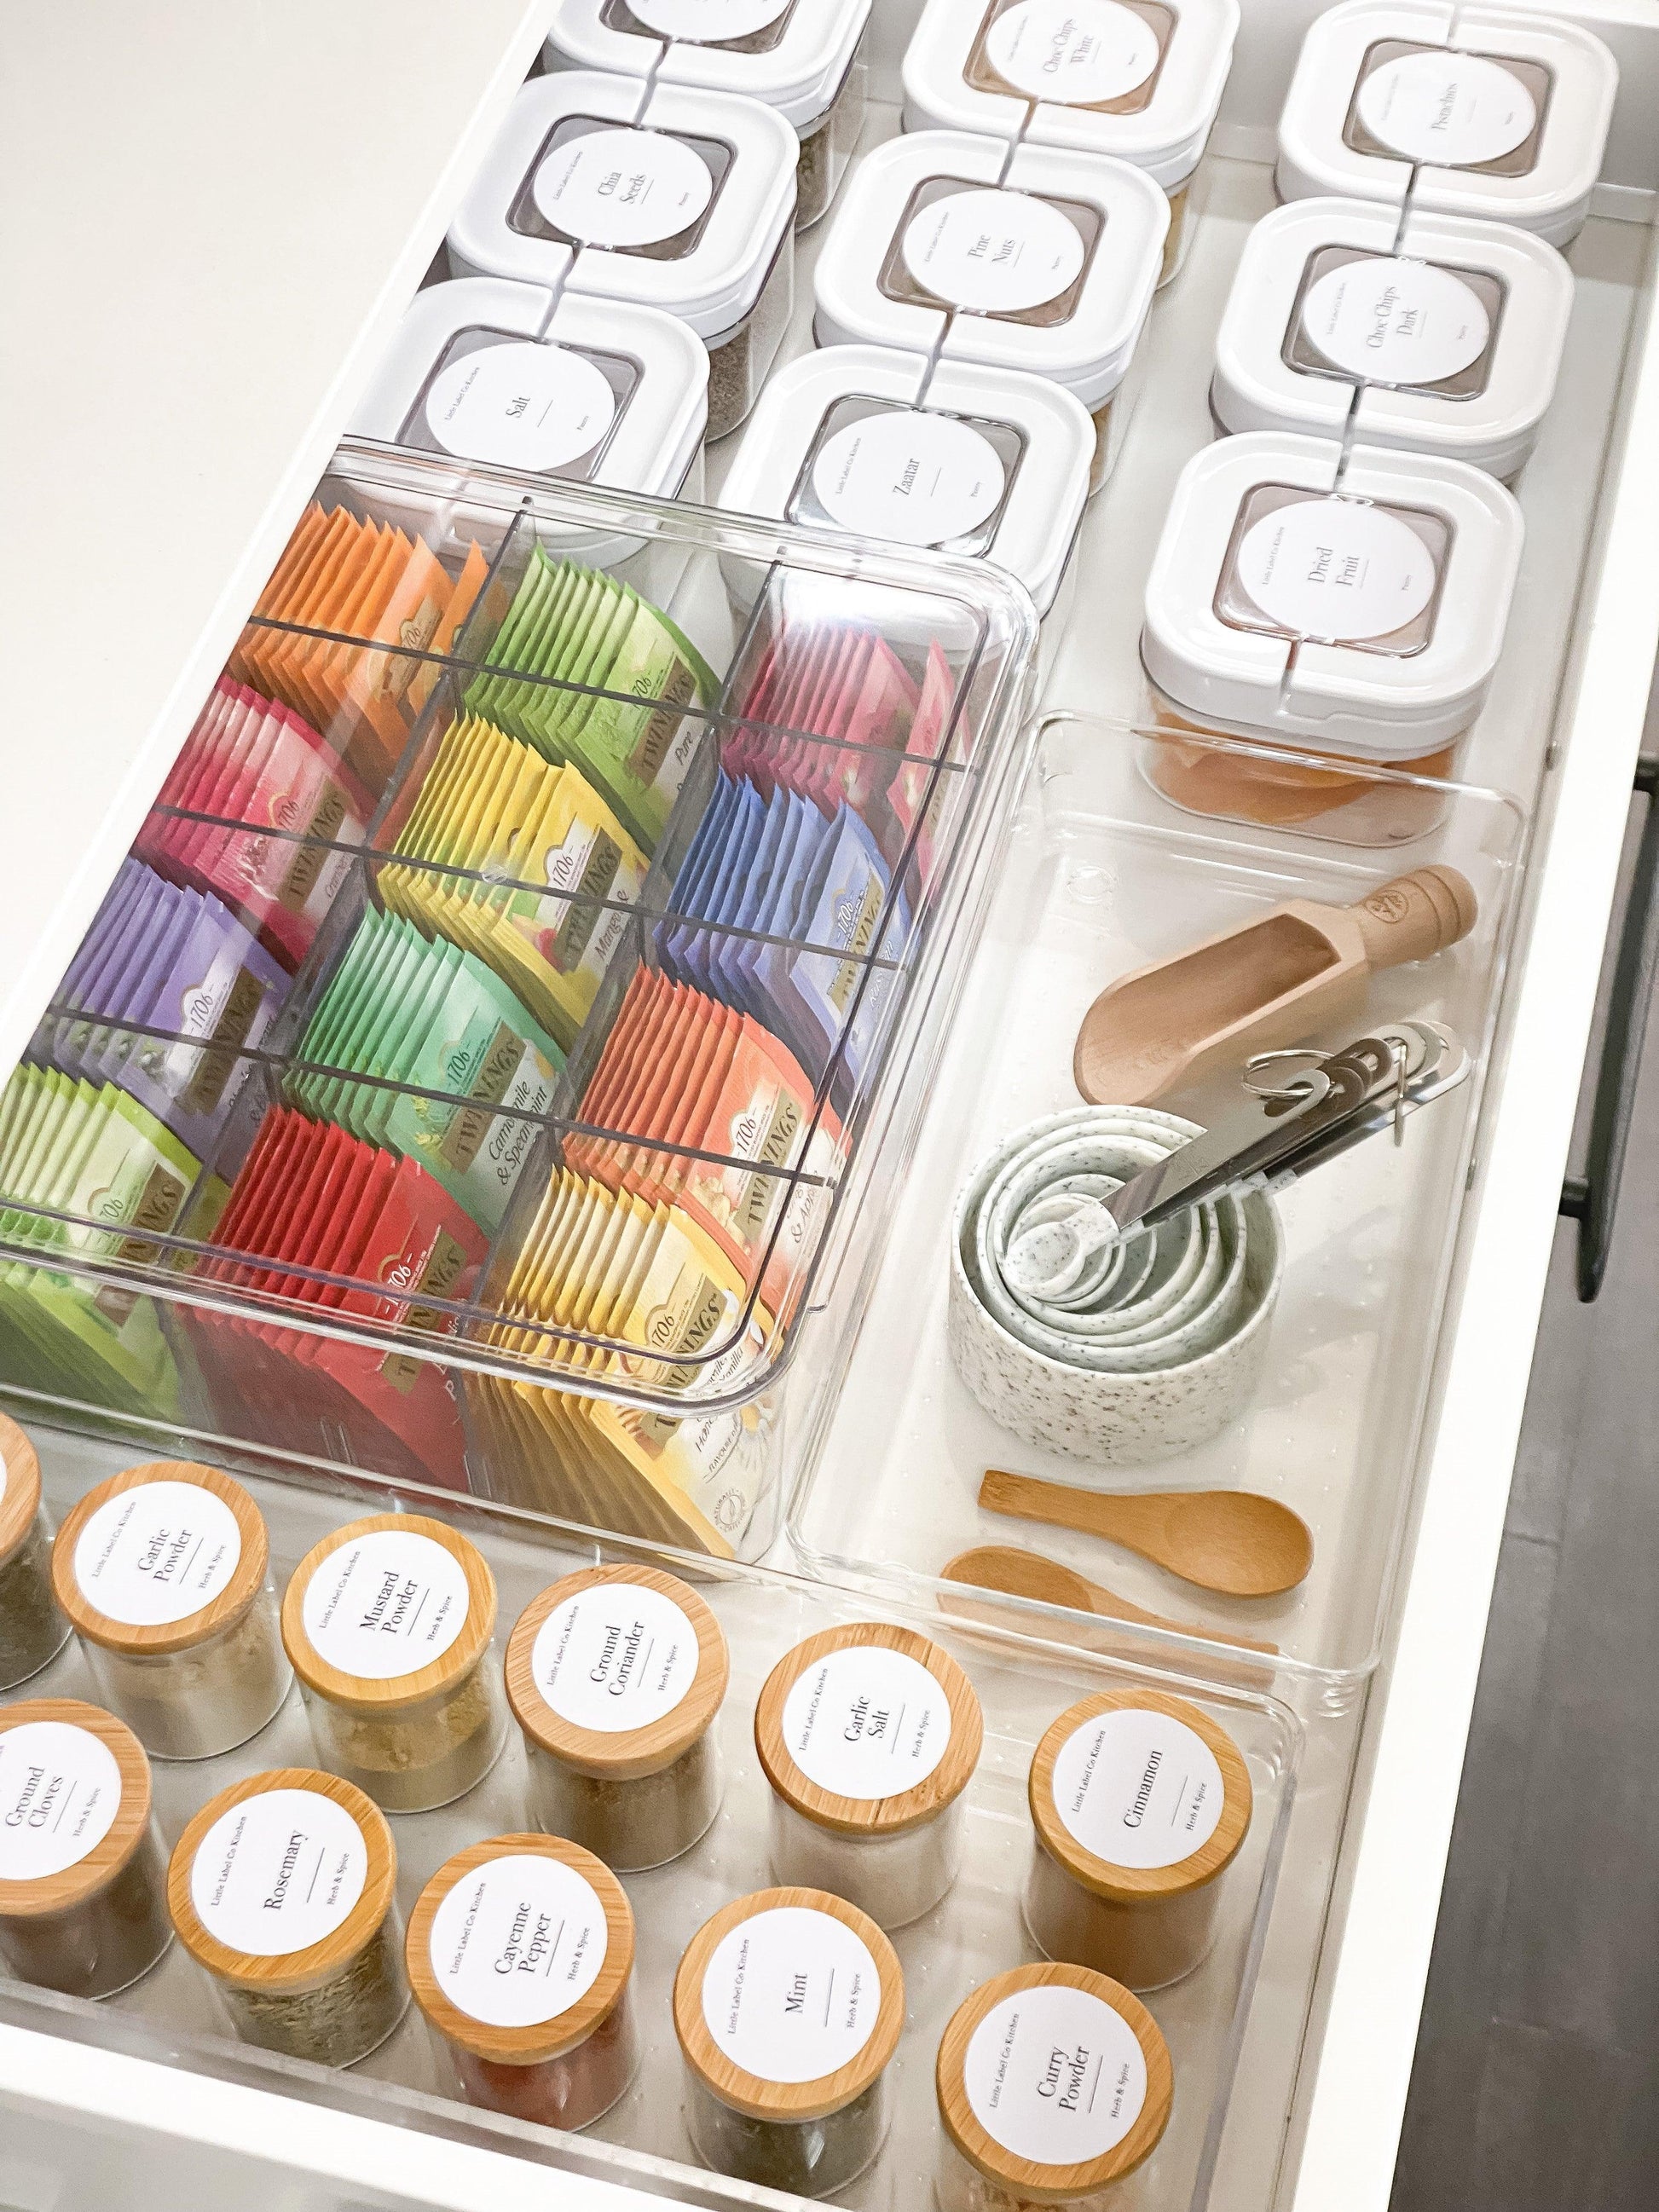 Shop Multi-use Storage Box with Removable Dividers, Home Organisation